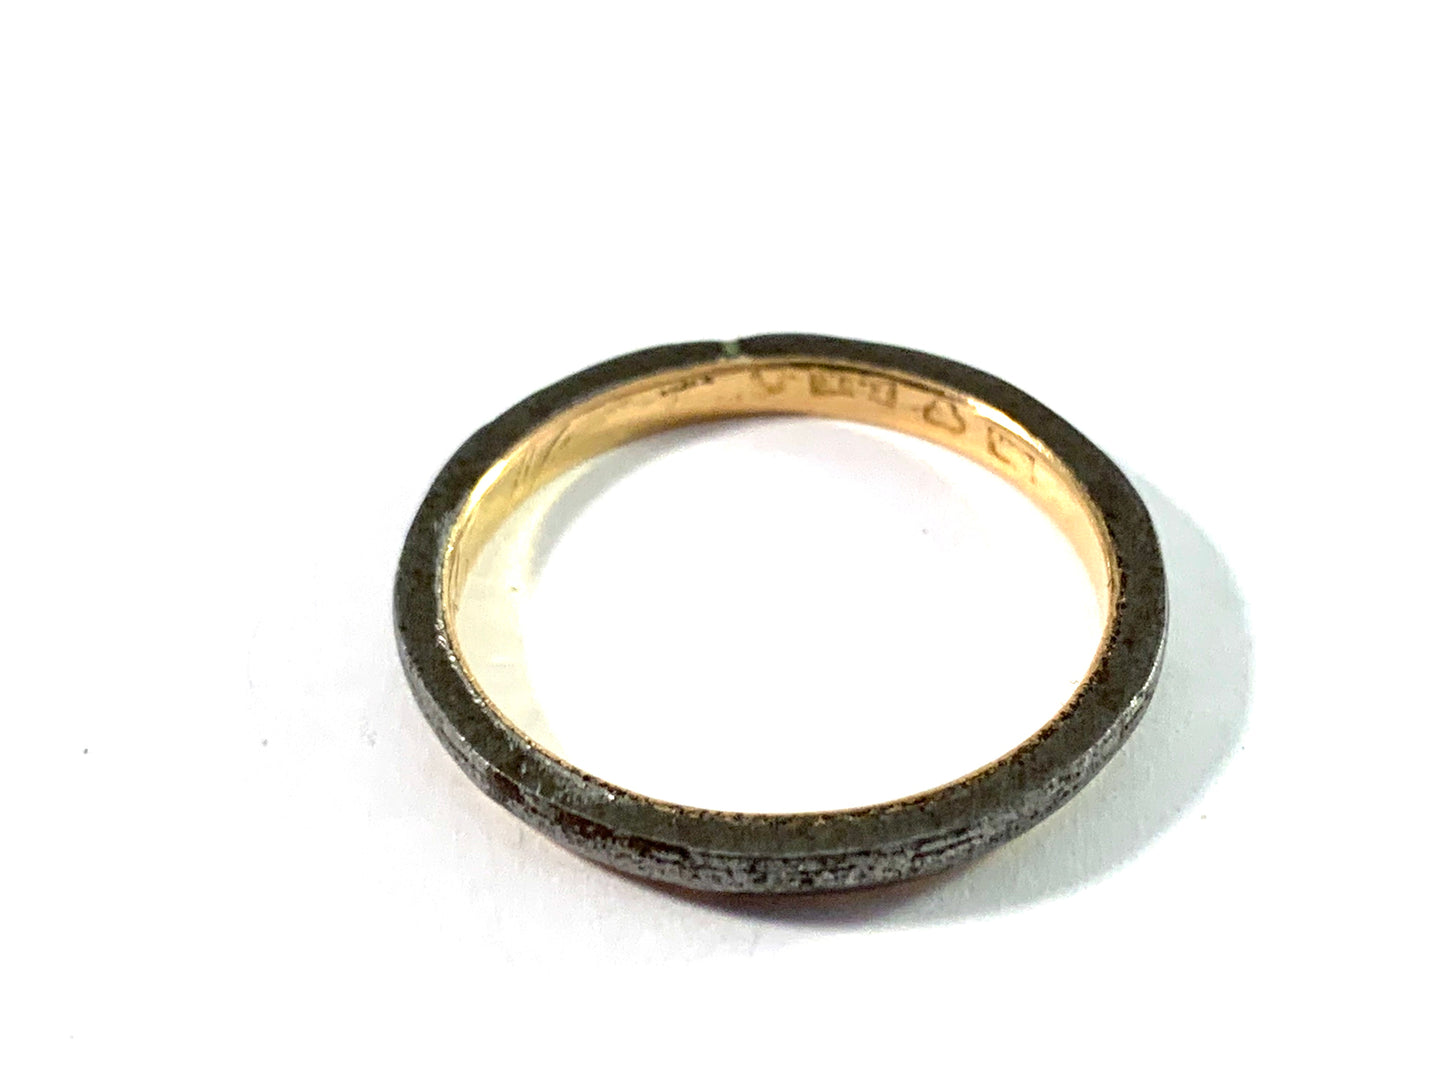 K Andersson Sweden early 1900s War-time 18k Gold Iron Ring.